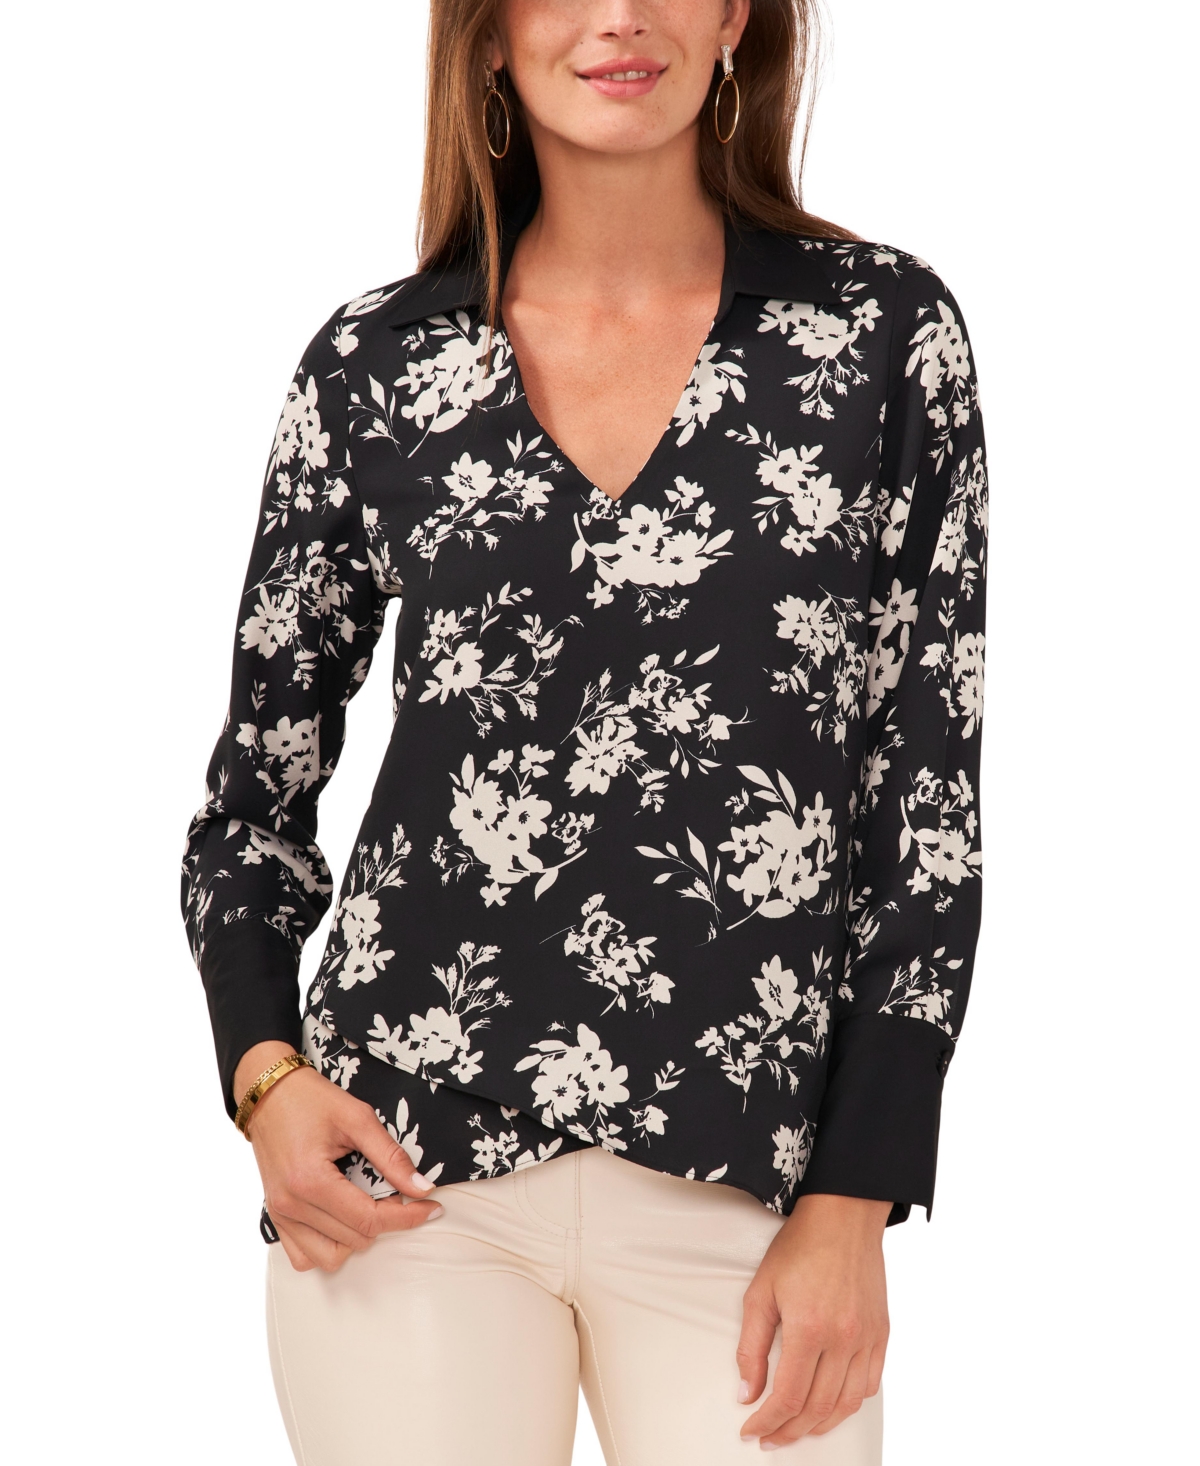 Women's Floral-Print Collared Top - Rich Black